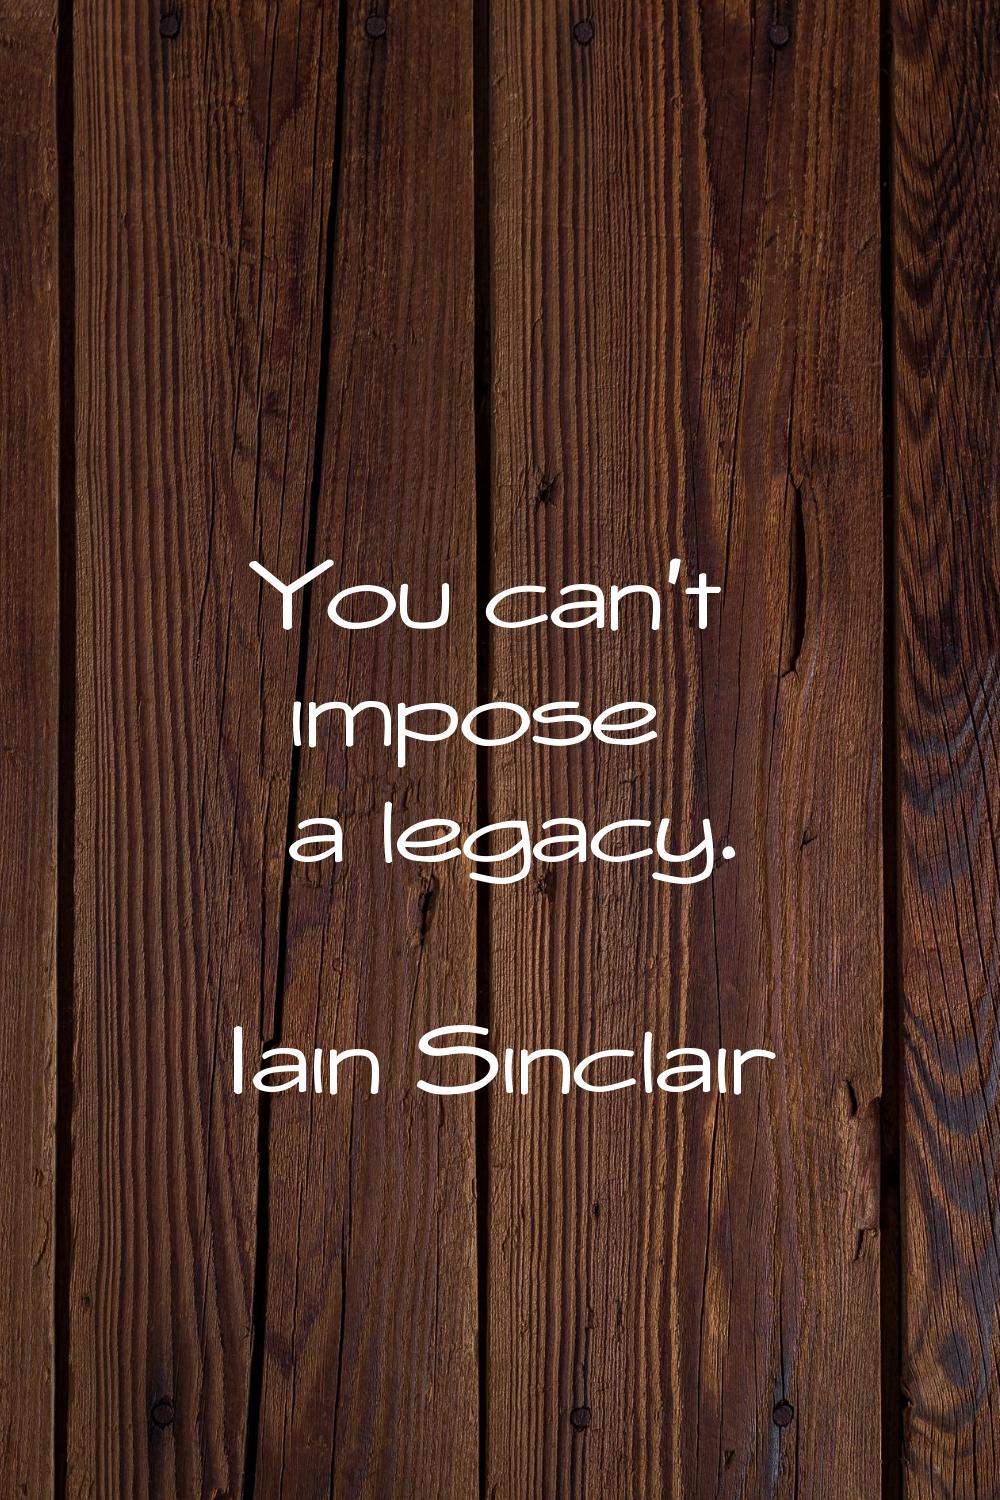 You can't impose a legacy.